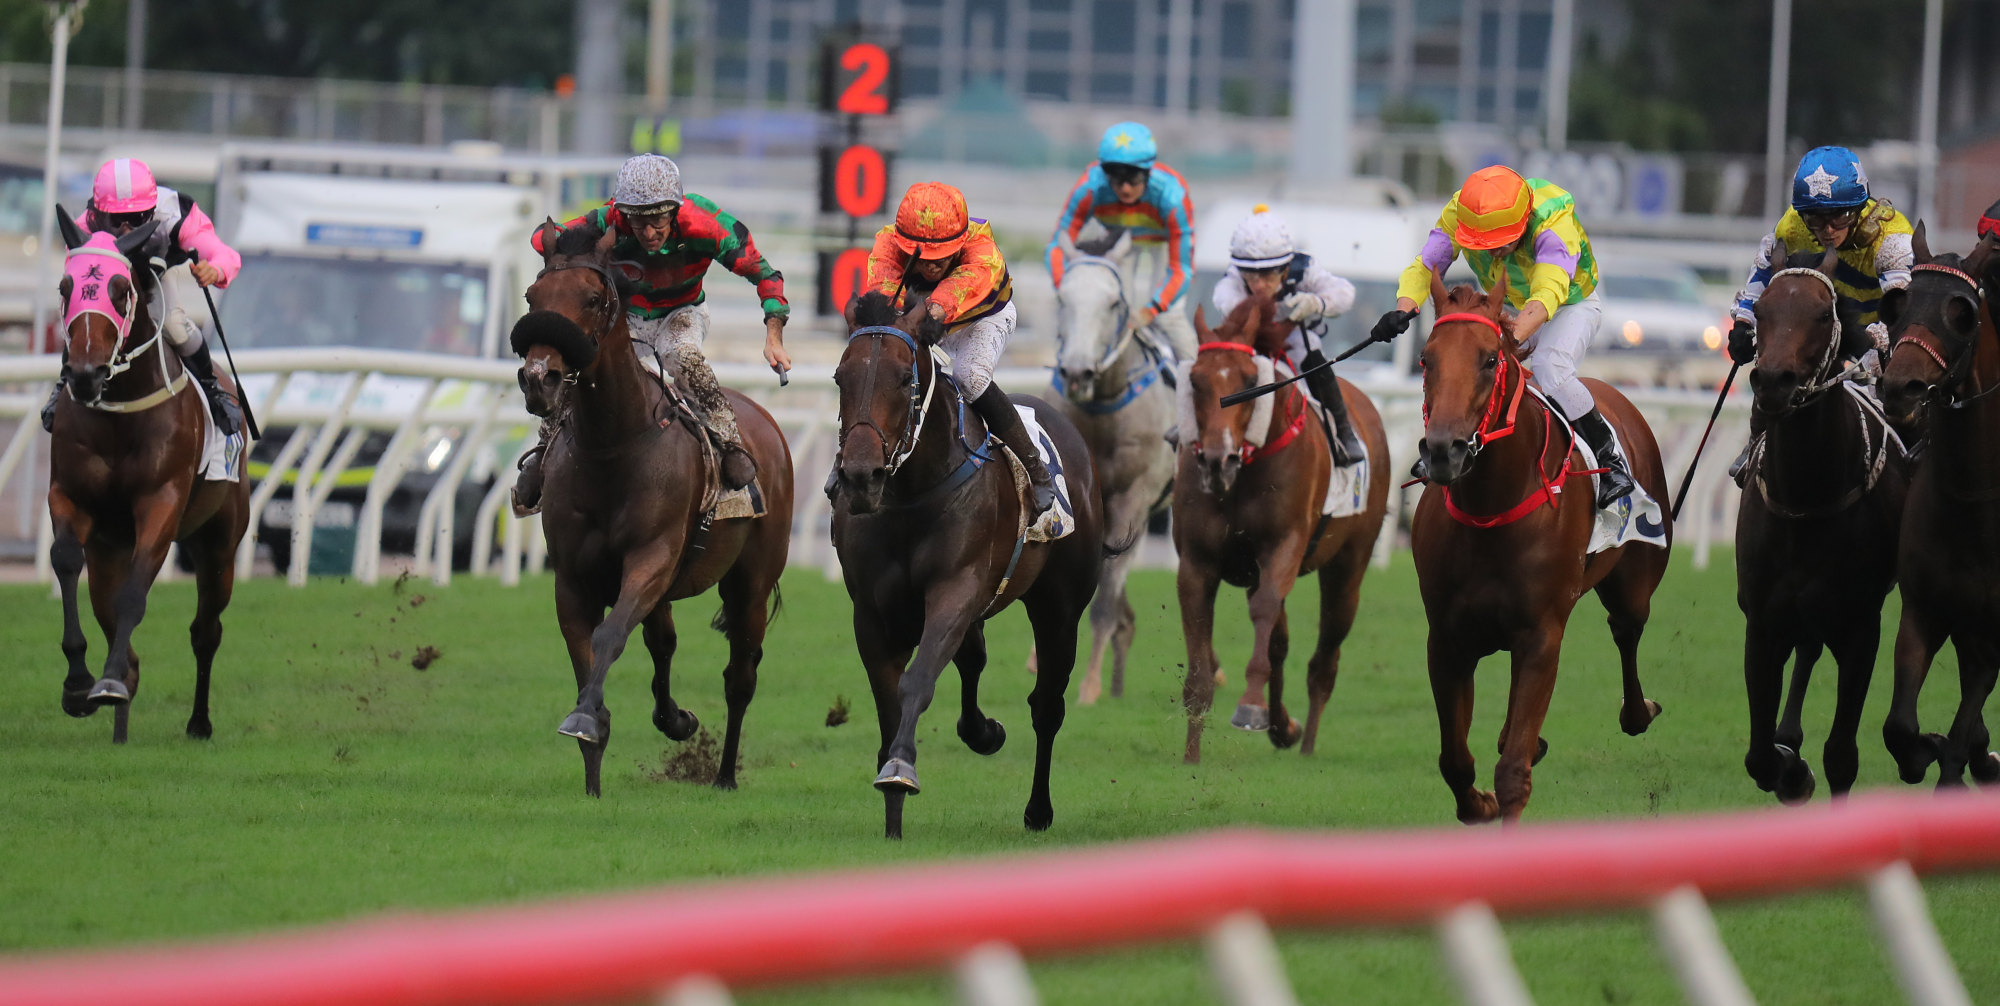 Straight Arron (centre) works his way down the middle of the track to win the Queen Mother Memorial Cup.